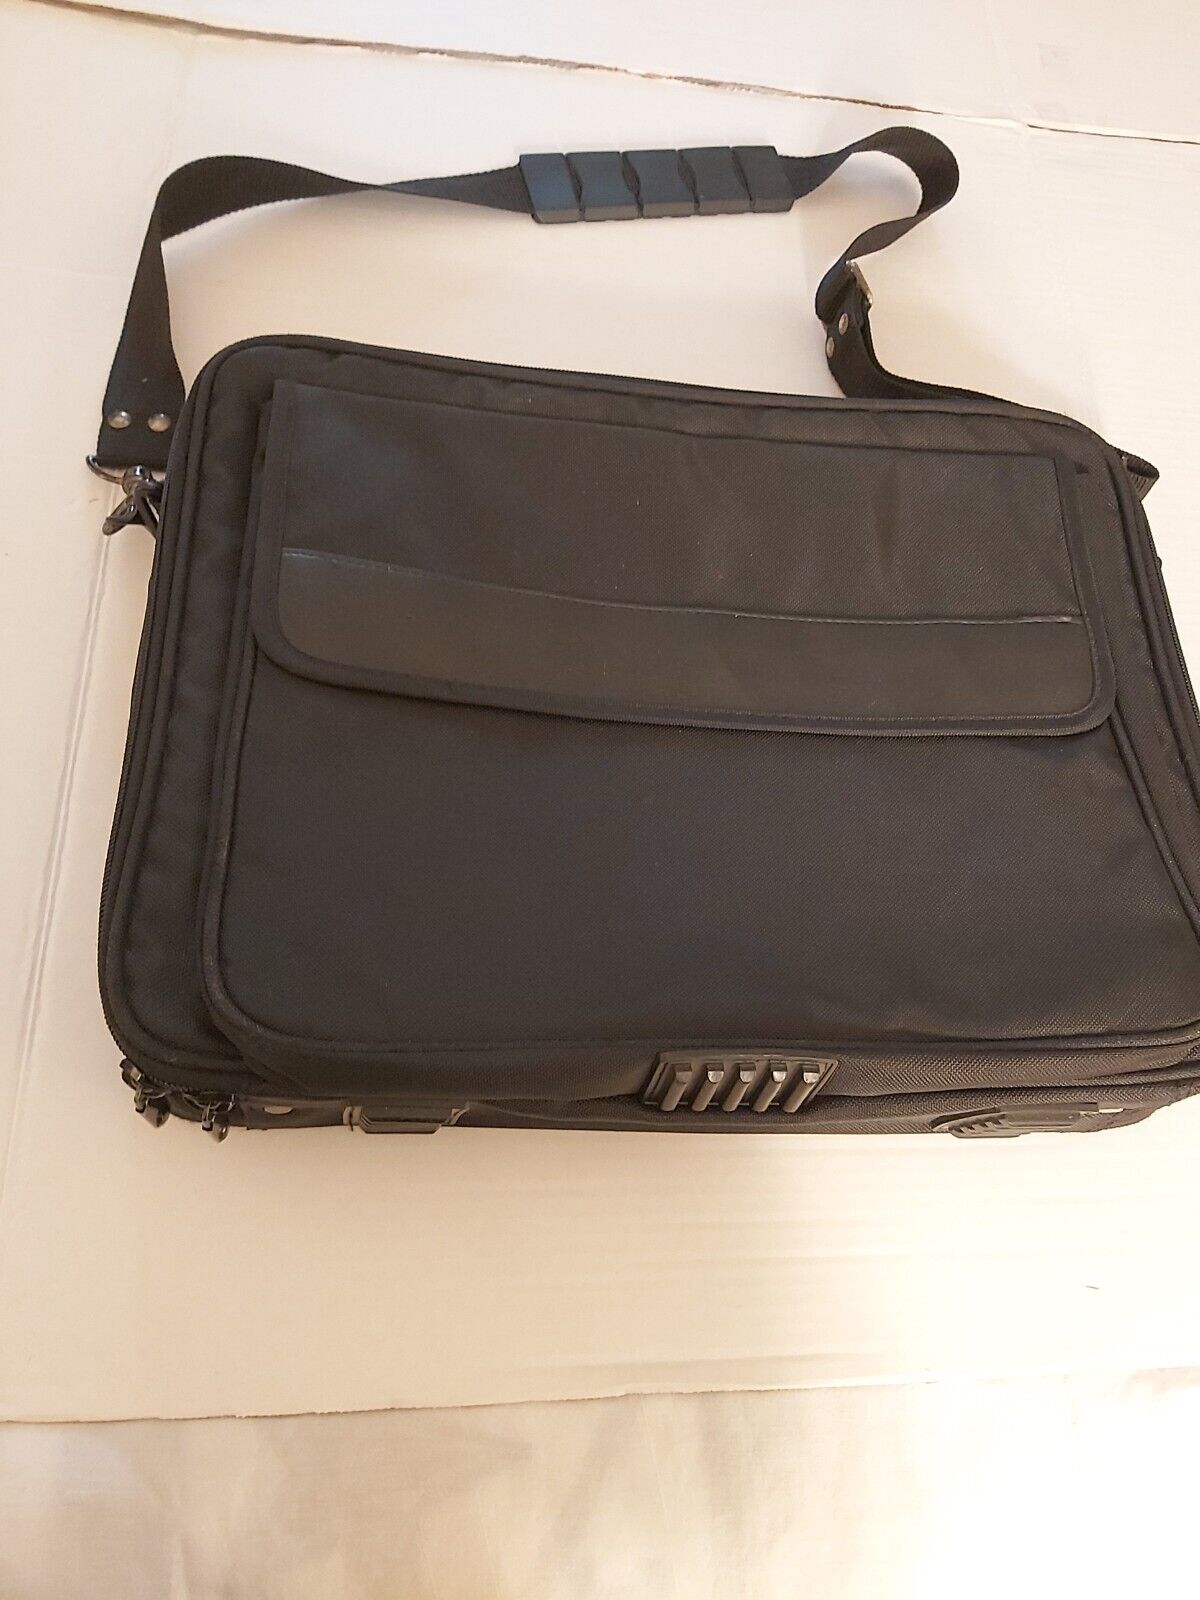 Laptop Carrying Case With Pockets 16L X 12W X 3D Black